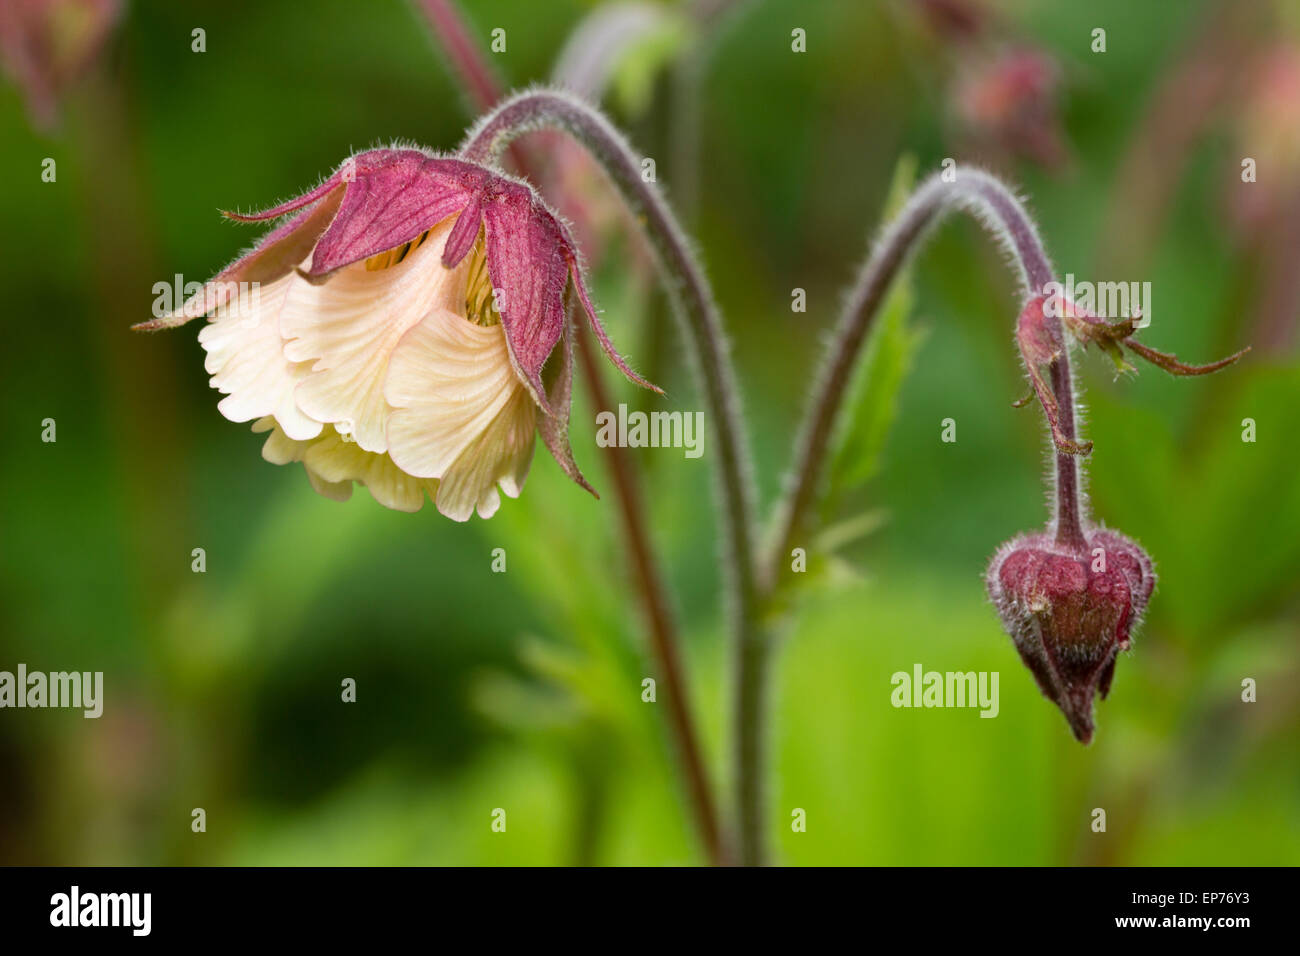 Close up of single flower and bud of the water avens, Geum rivale Stock Photo